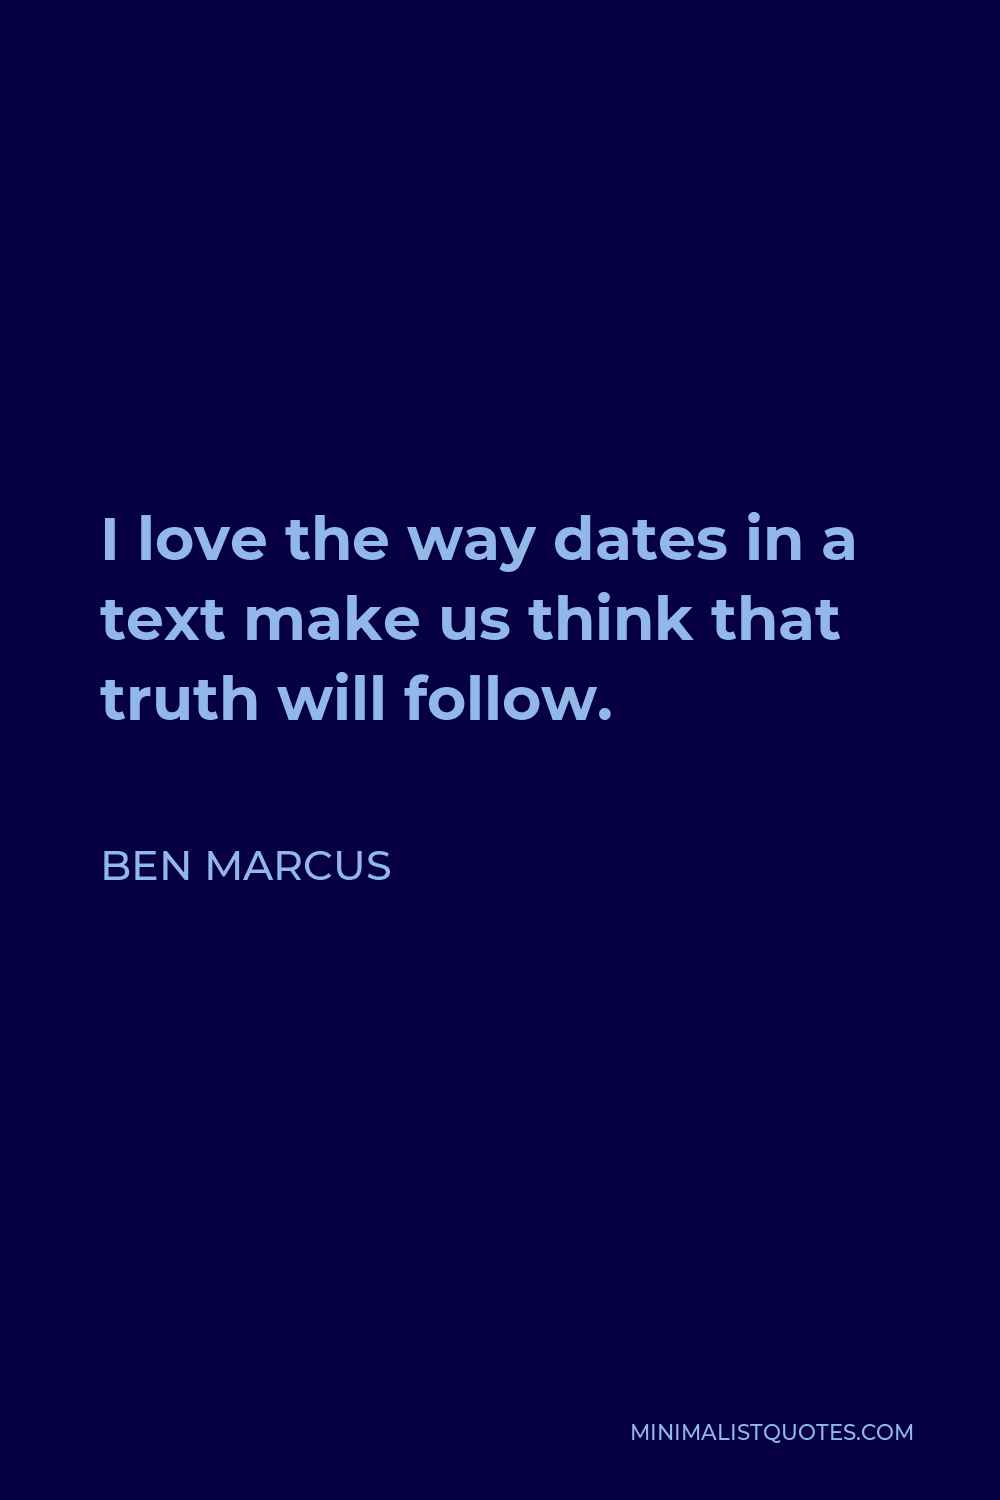 Ben Marcus Quote - I love the way dates in a text make us think that truth will follow.